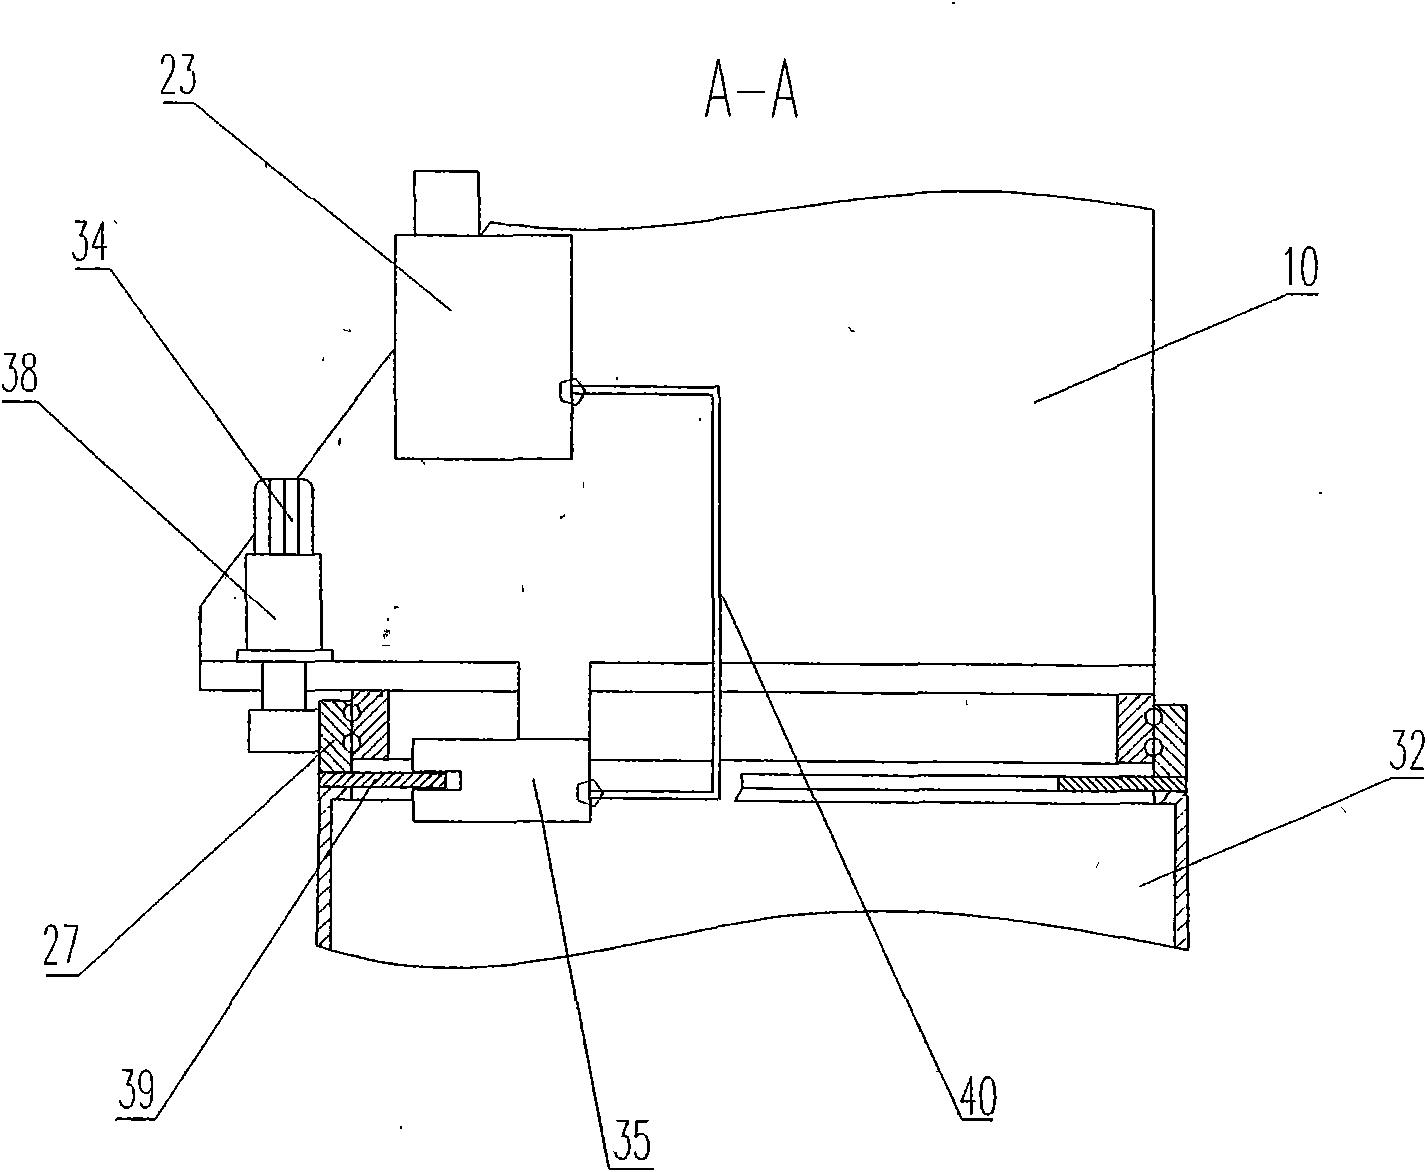 Grid-connected hybrid-driven variable-pitch variable-speed constant-frequency wind turbine generator set